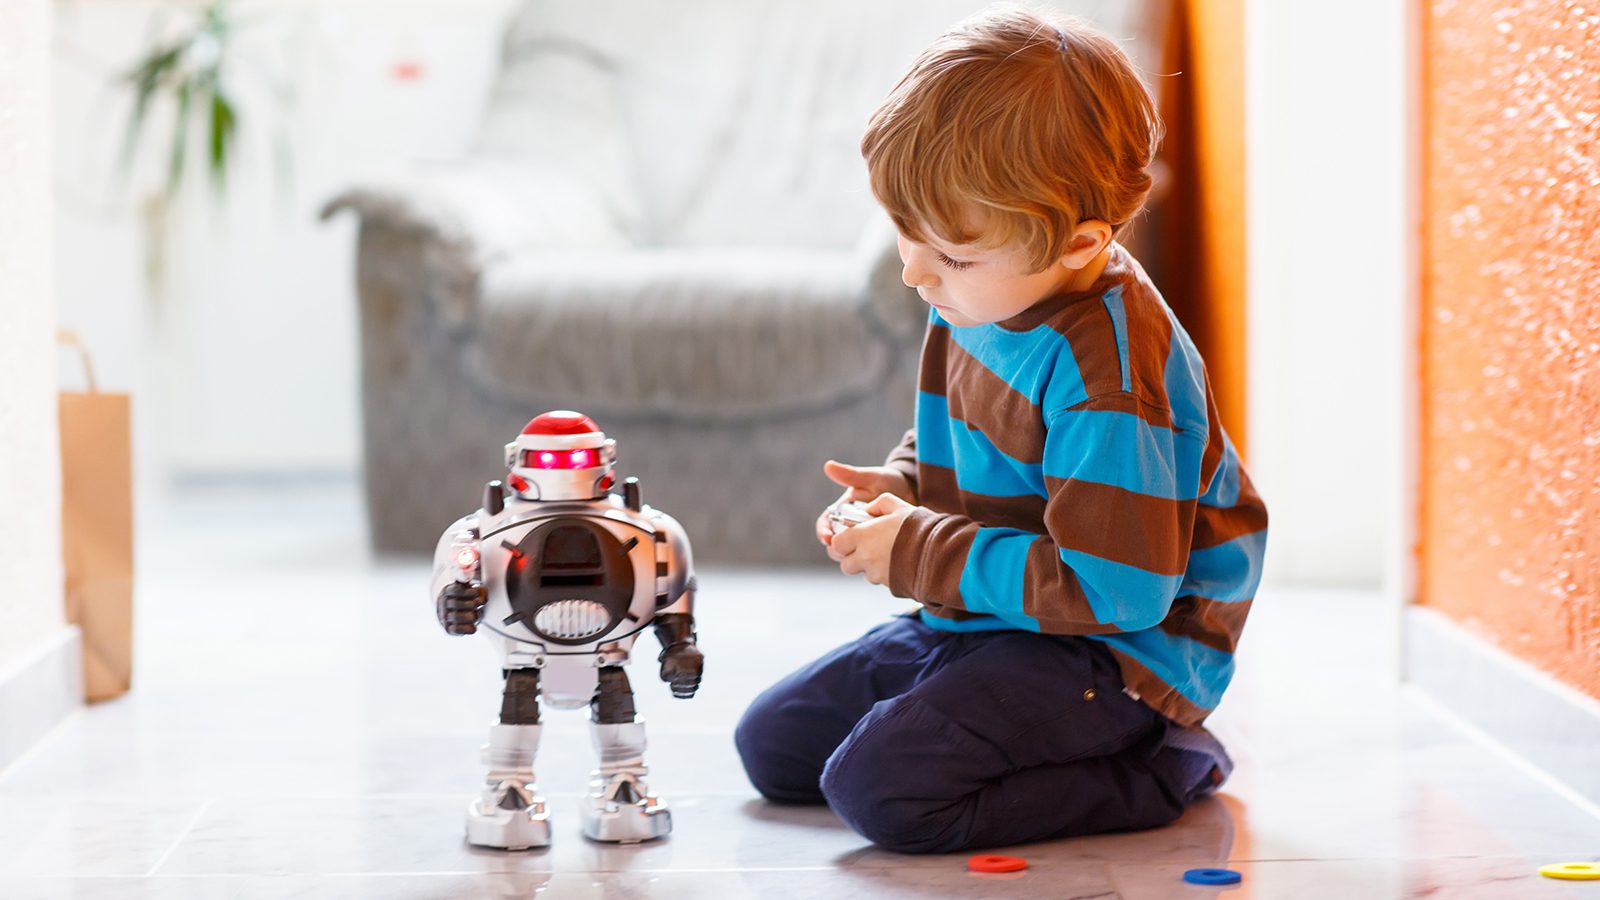 Researchers Explain Why Autistic Children Learn Better From Robots